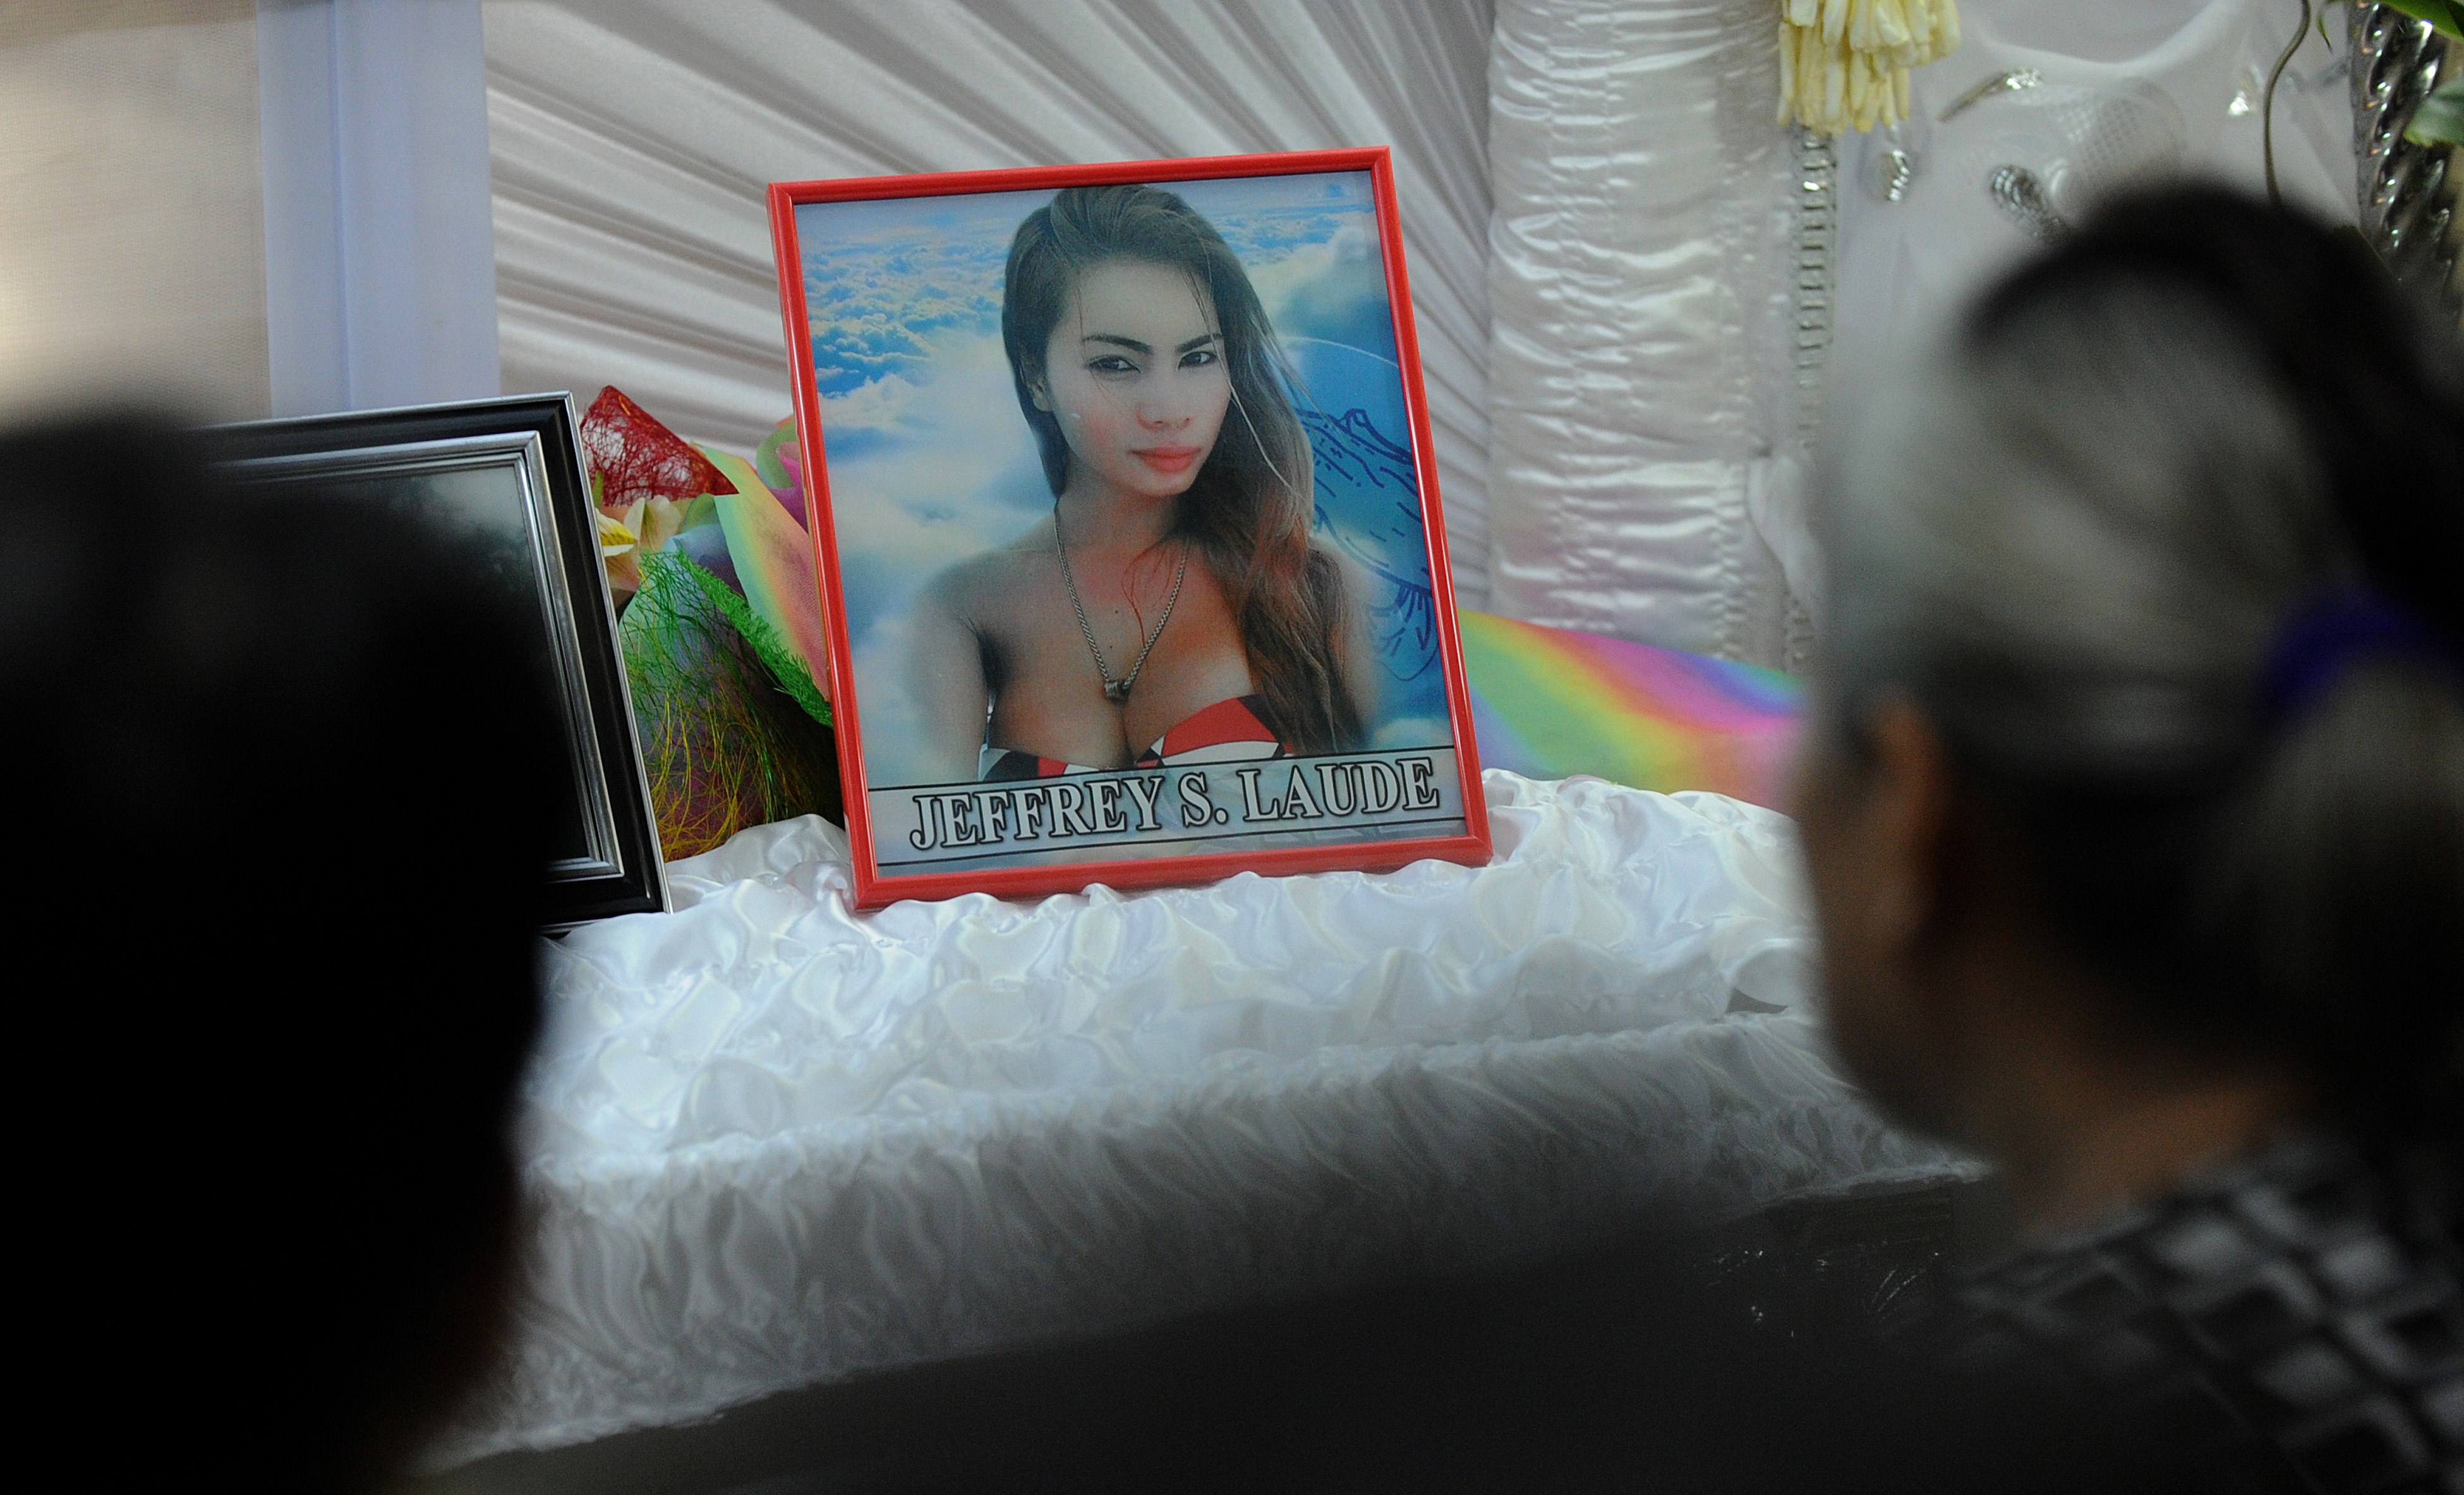 Friends and relatives of Jeffrey Laude, a Filipino transgender woman who went by Jennifer, look at her coffin in the northern Philippine city of Olongapo on Oct. 14, 2014. (Jay Directo—AFP/Getty Images)